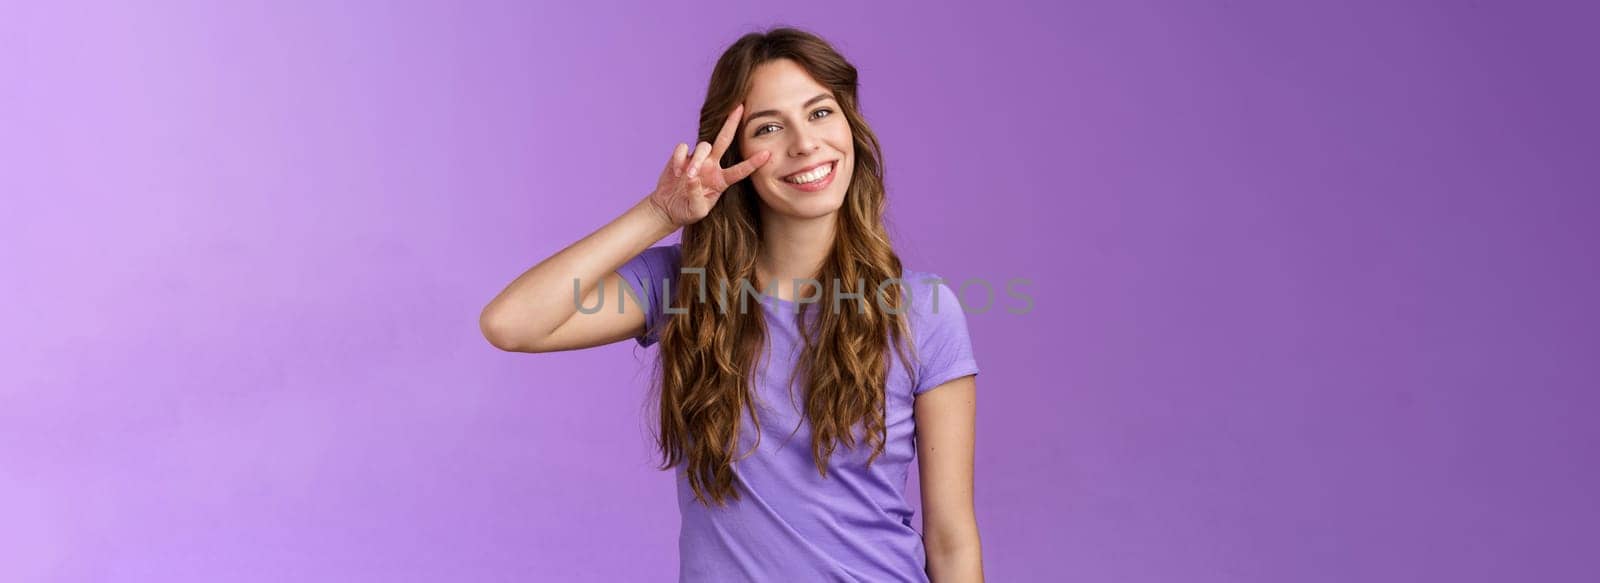 Tender friendly outgoing attractive female tilt head lovely cute gaze show peace victory sign express positivity love cherish friendship stand purple background upbeat relaxed casual pose by Benzoix